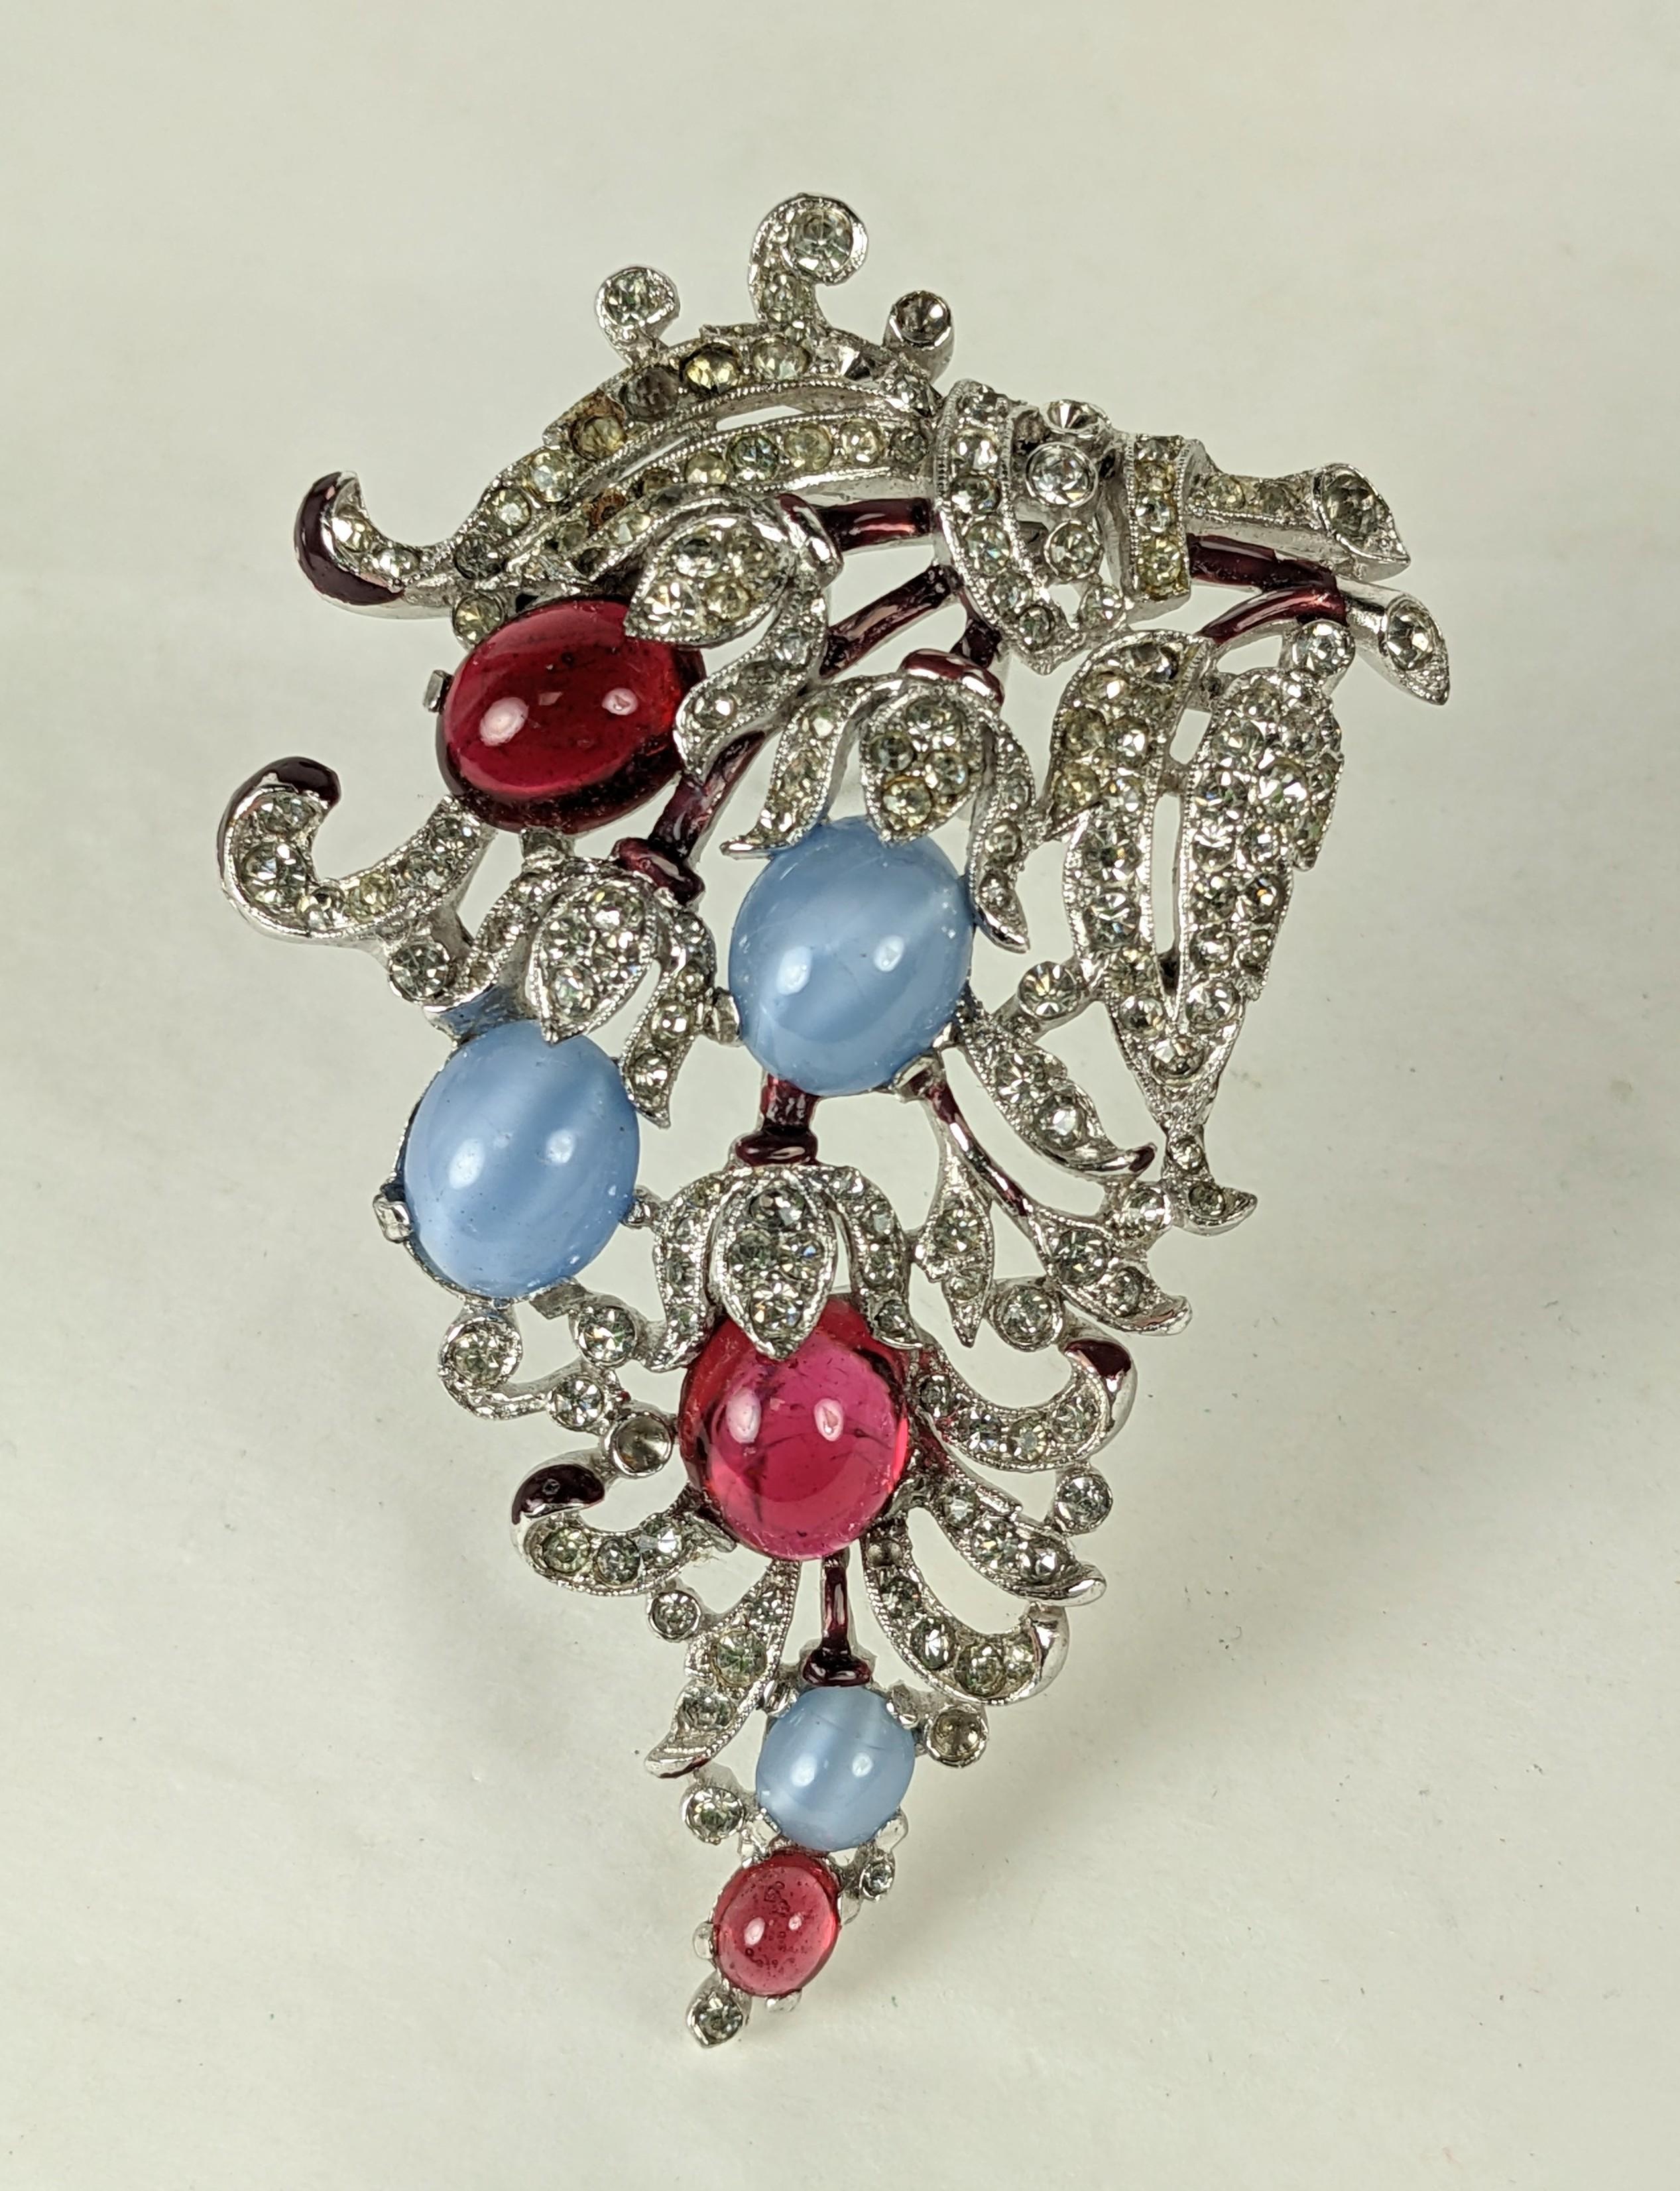 Lovley Trifari 'Alfred Philippe' blue moonstone and ruby cabochon clip brooch with dark magenta cold enamel accents and crystal pave rhinestones. Rhodium plated base metal, rhinestones, enameling, cabochons.
Marked: Trifari with Crown, Excellent